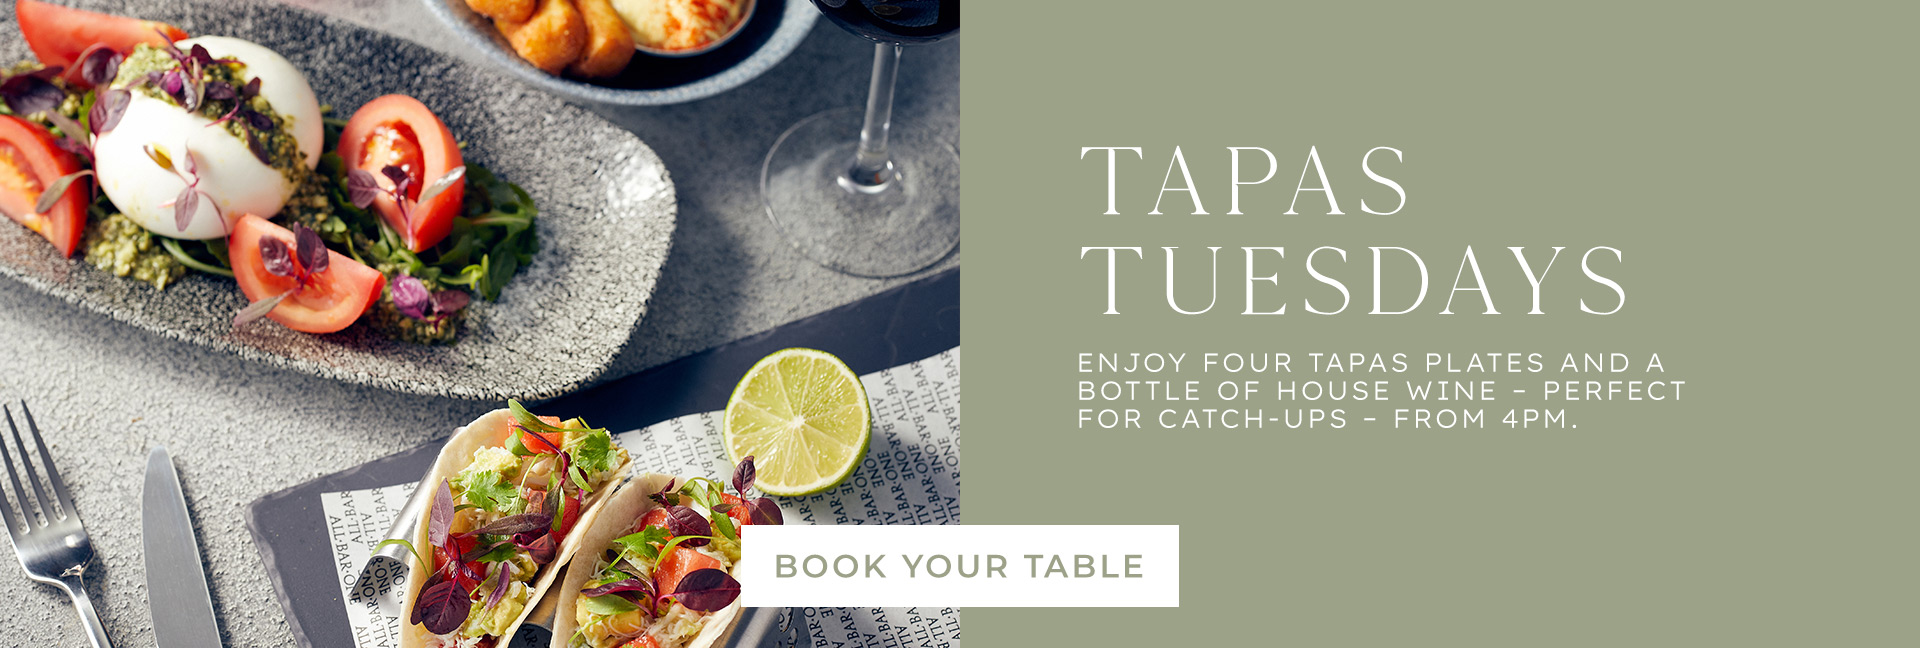 Tapas Tuesday at All Bar One Regent Street - Book now